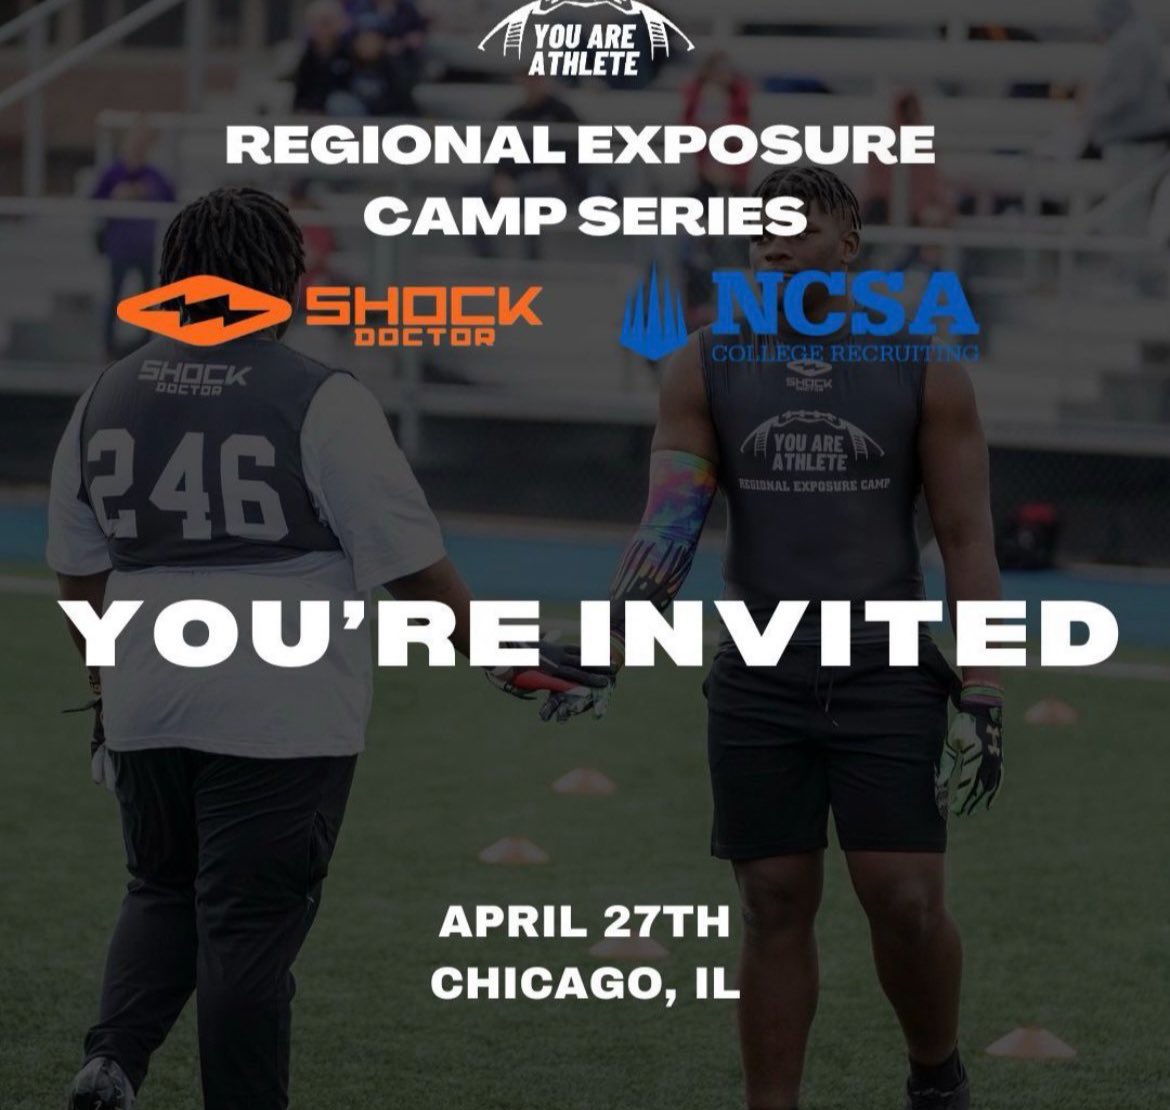 Thank you for the invite!! @youareathlete @ShockDoctor